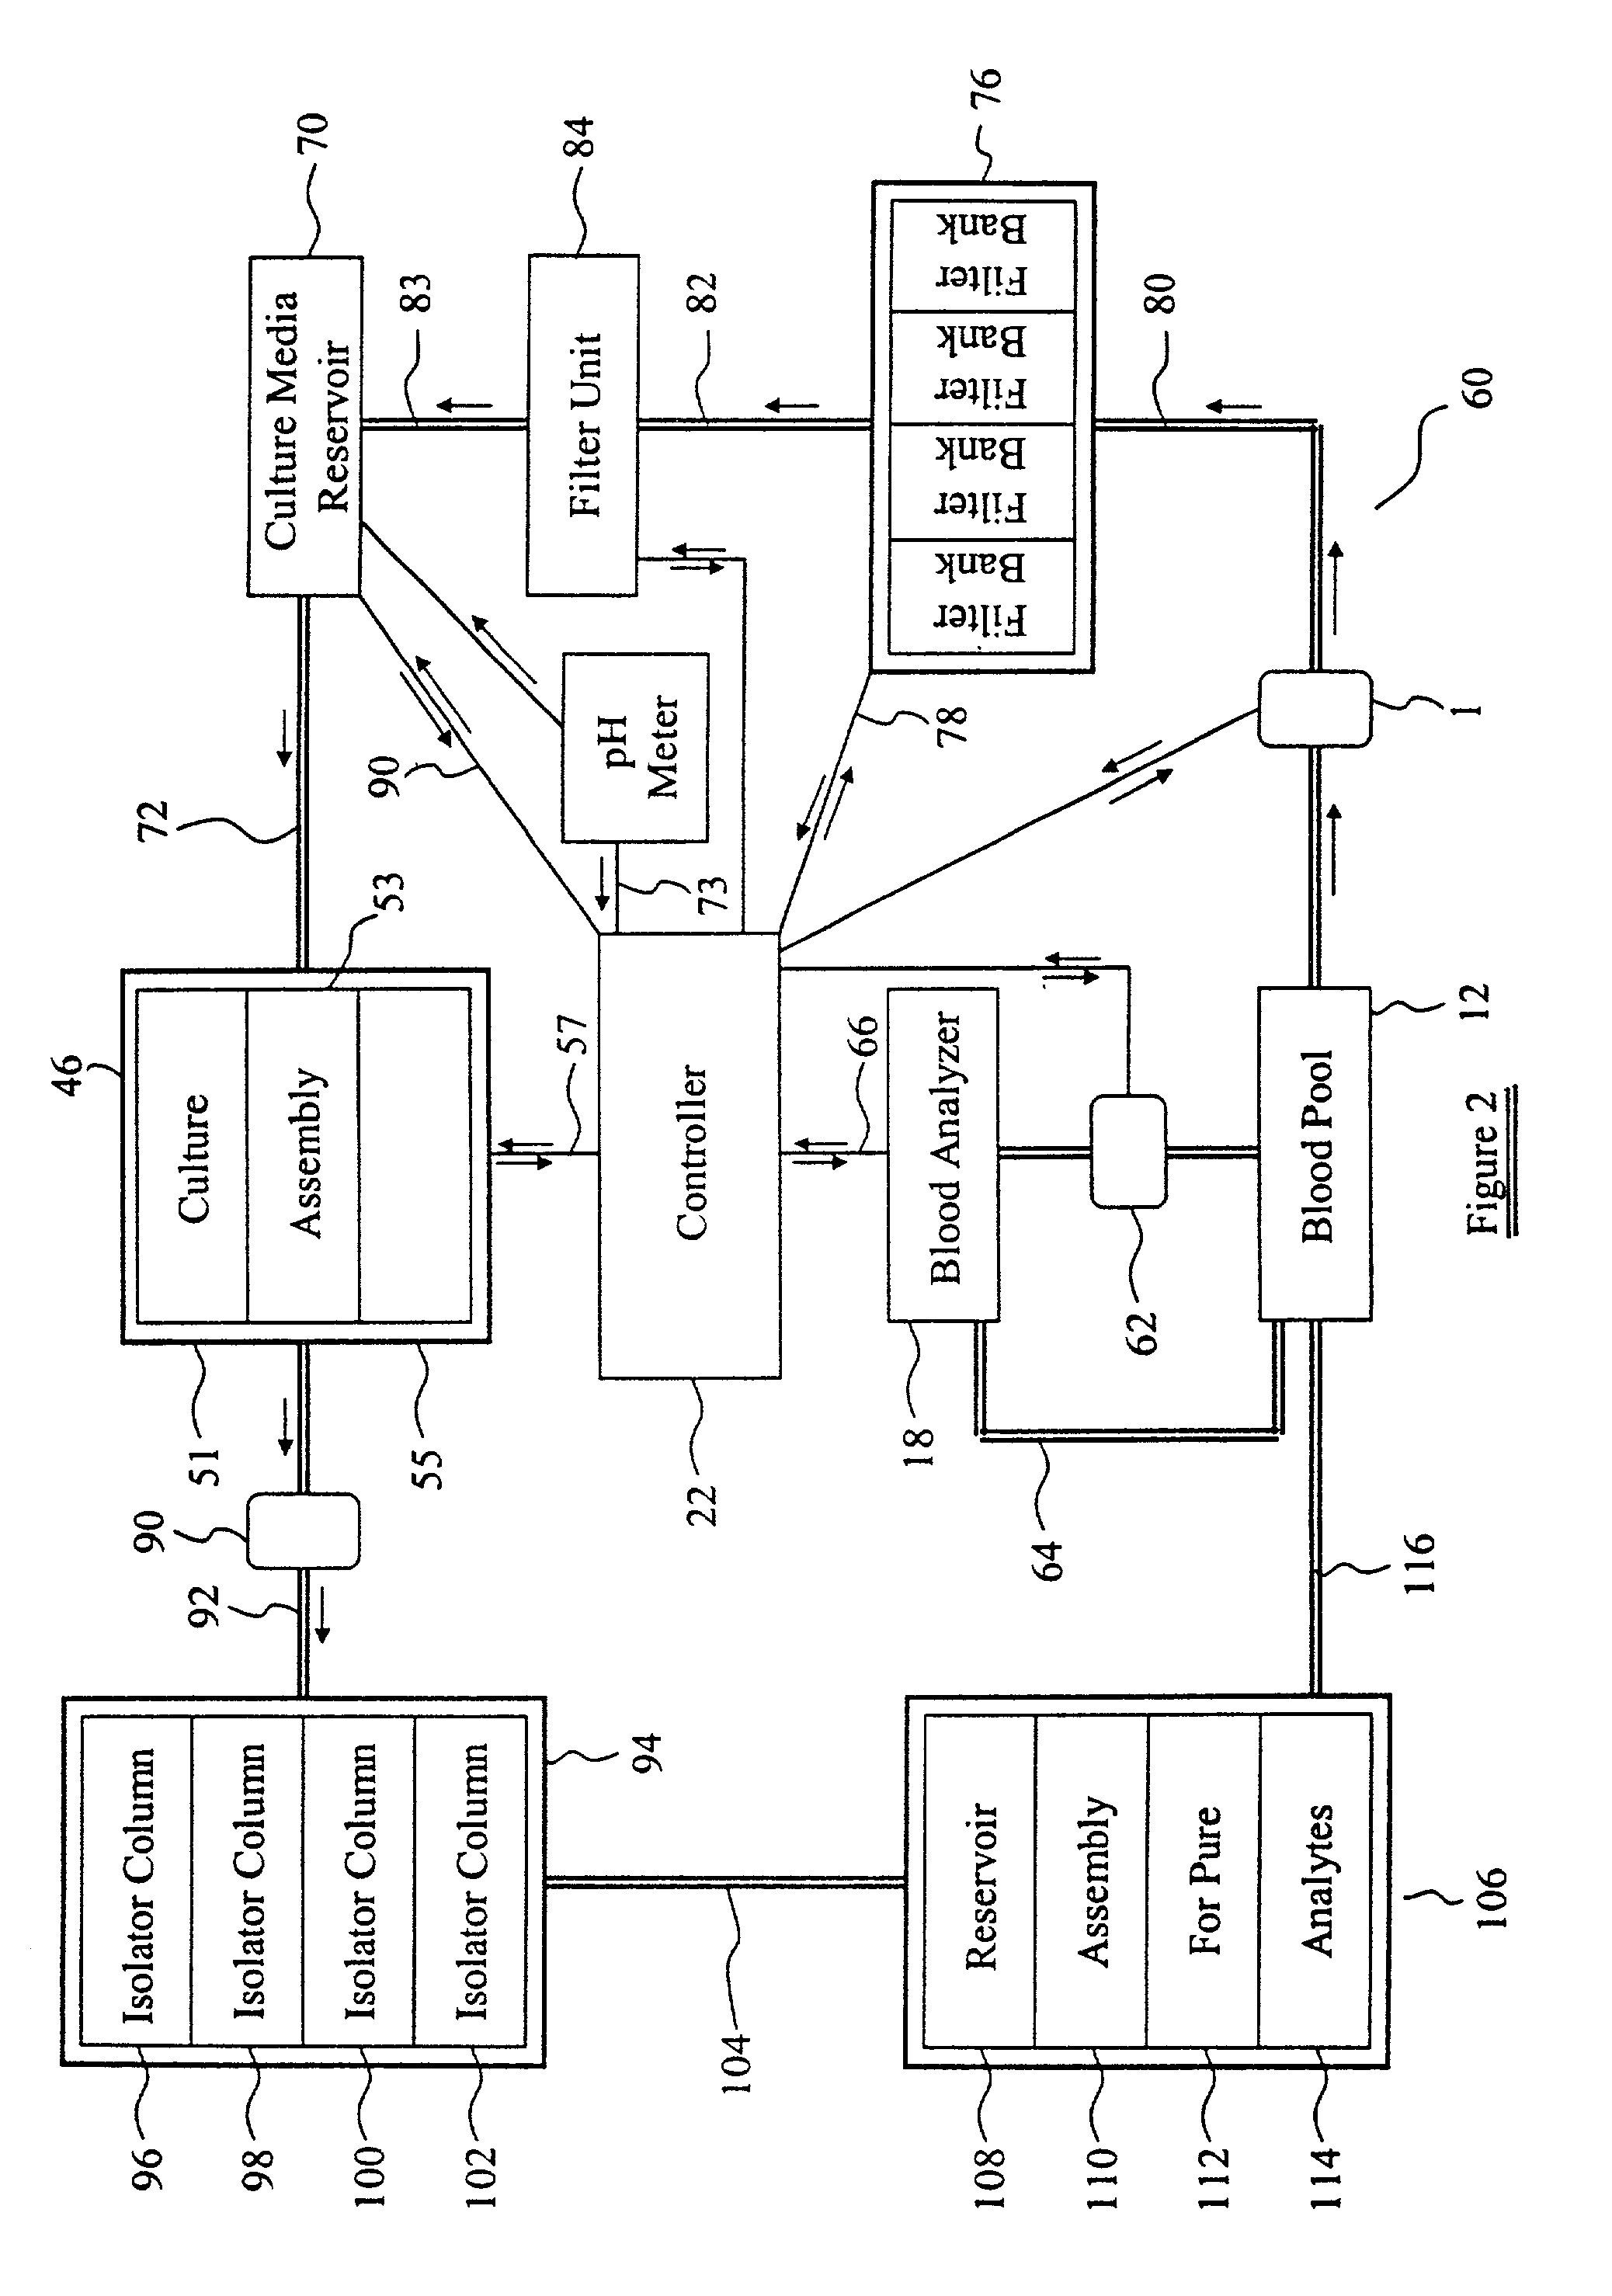 Process for identifying cancerous and/or metastatic cells of a living organism